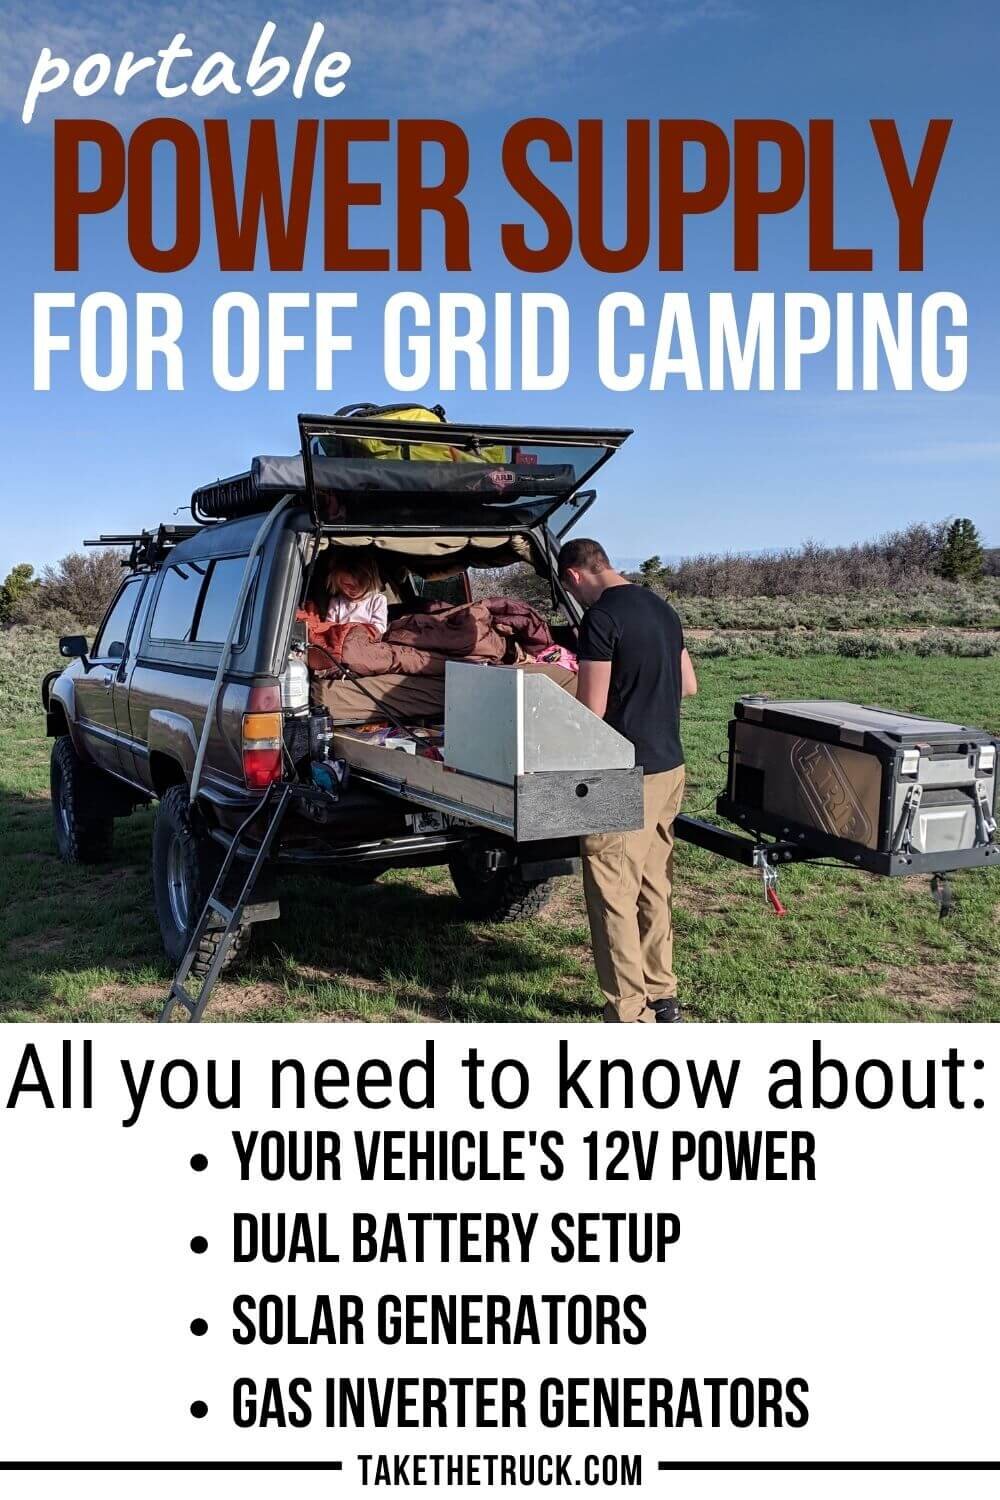 Camping power supply is a huge topic! This post outlines 4 camping power supply ideas - your vehicle’s battery and inverter, a dual battery setup, or using a solar generator or gas inverter generator.